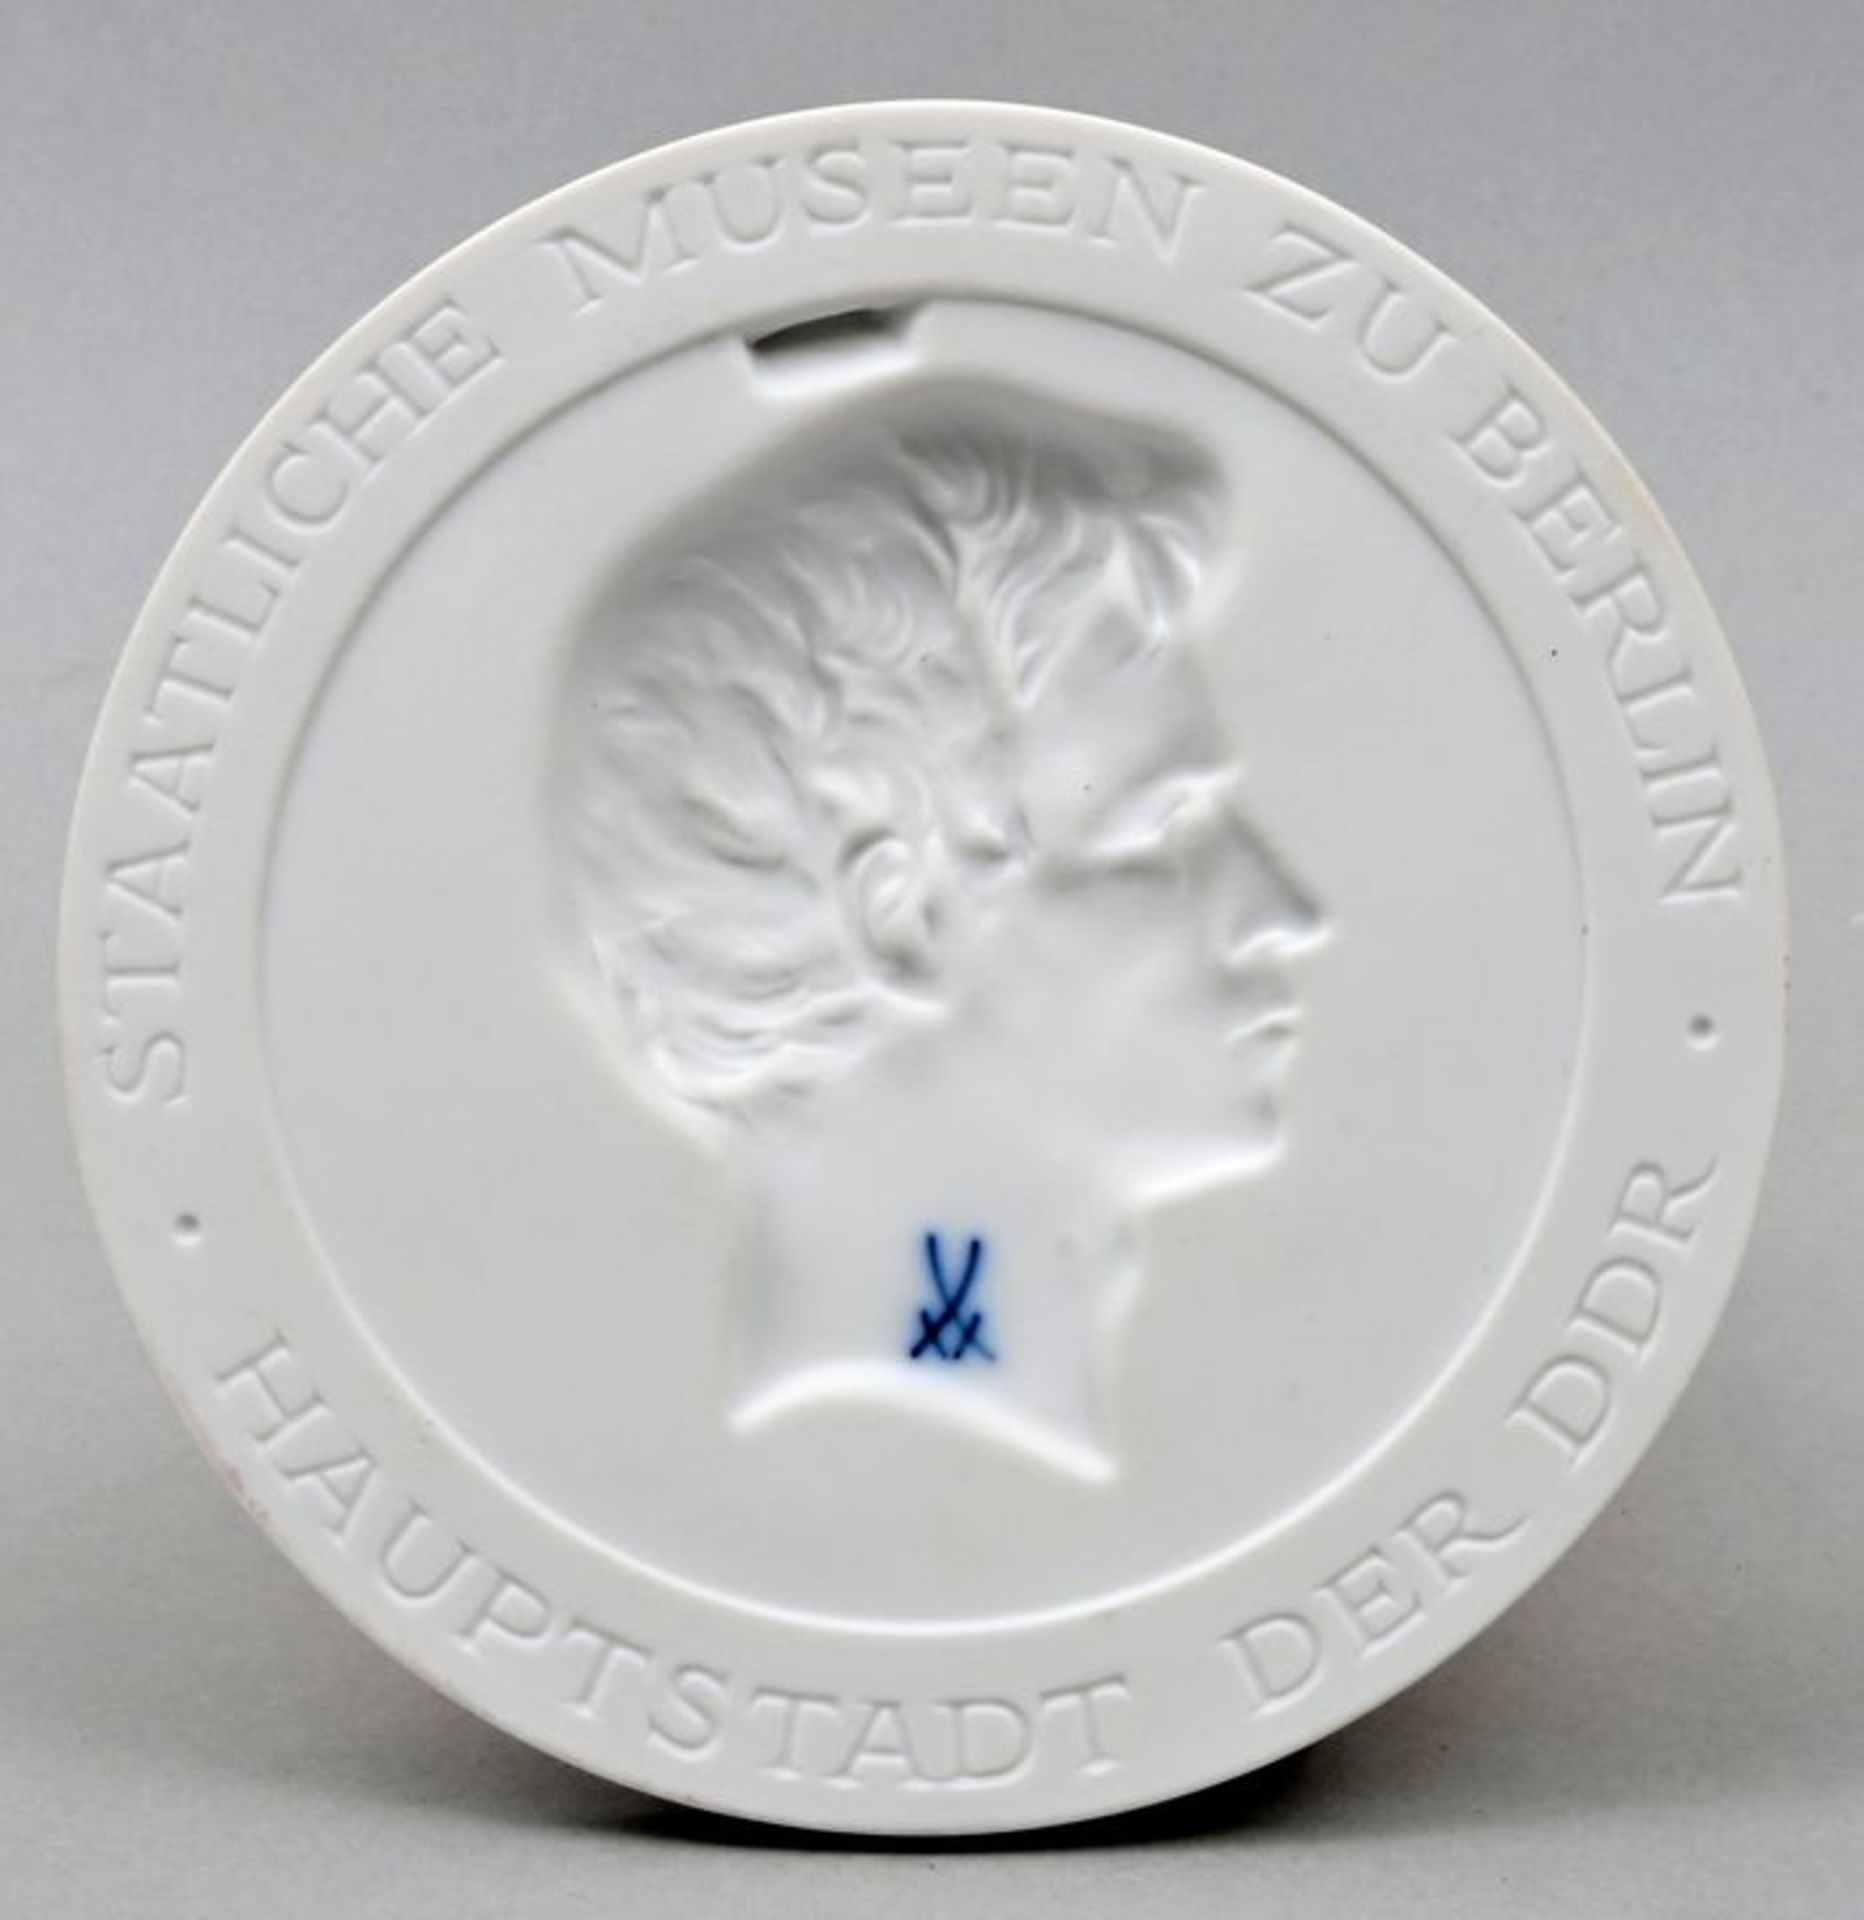 Plakette Meissen Lilienthal / Plaque with relief head - Image 2 of 3